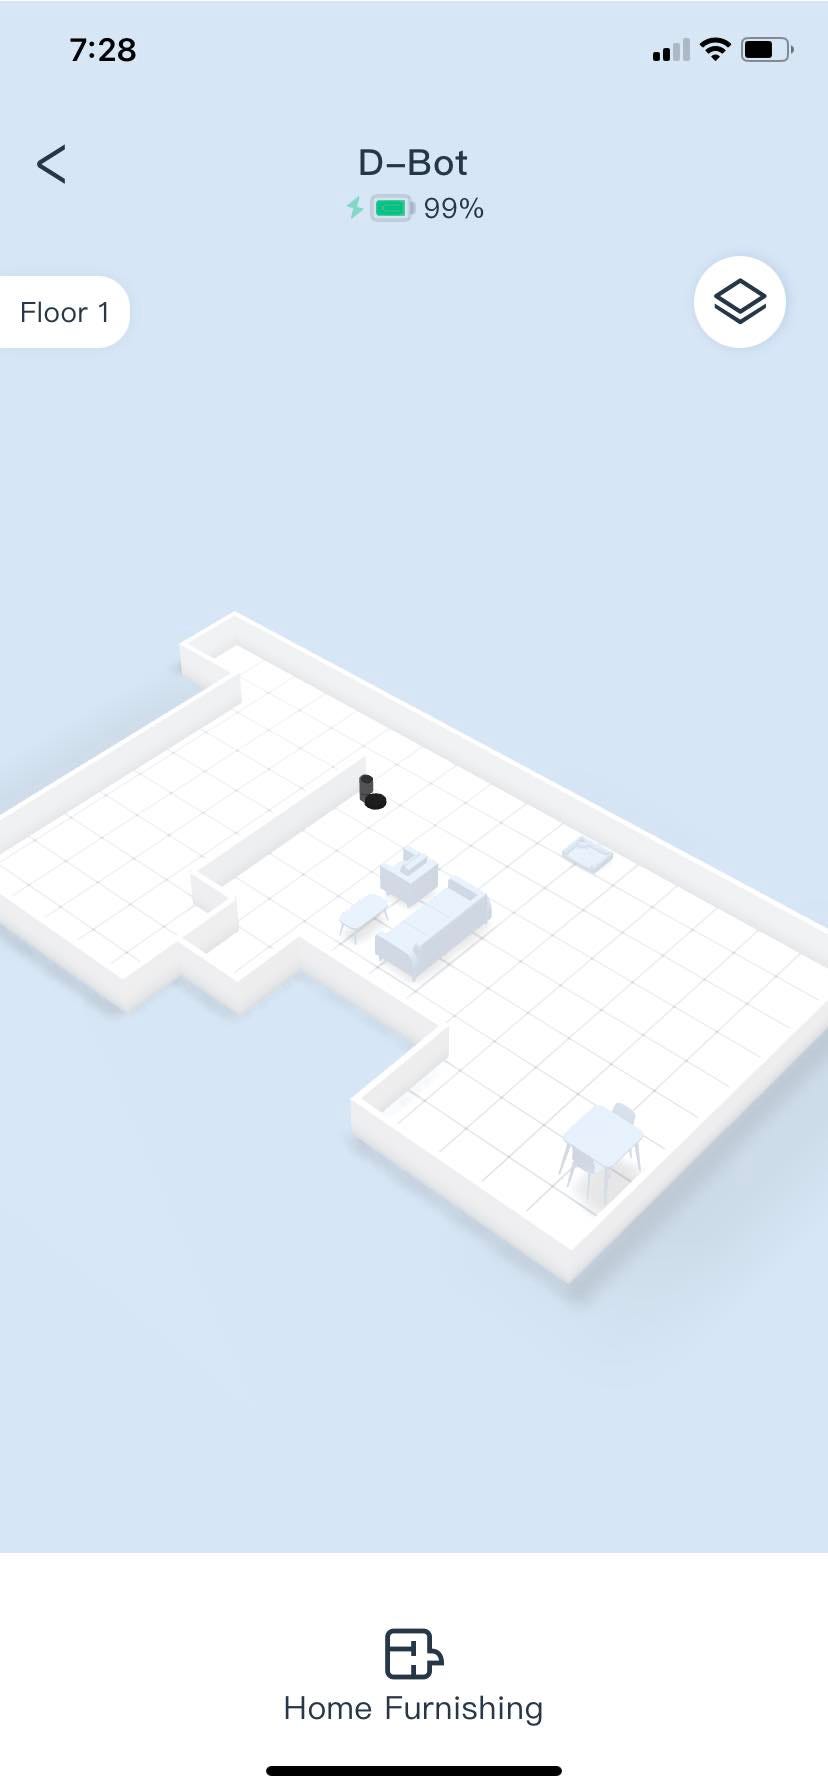 3D mapping with furniture addition